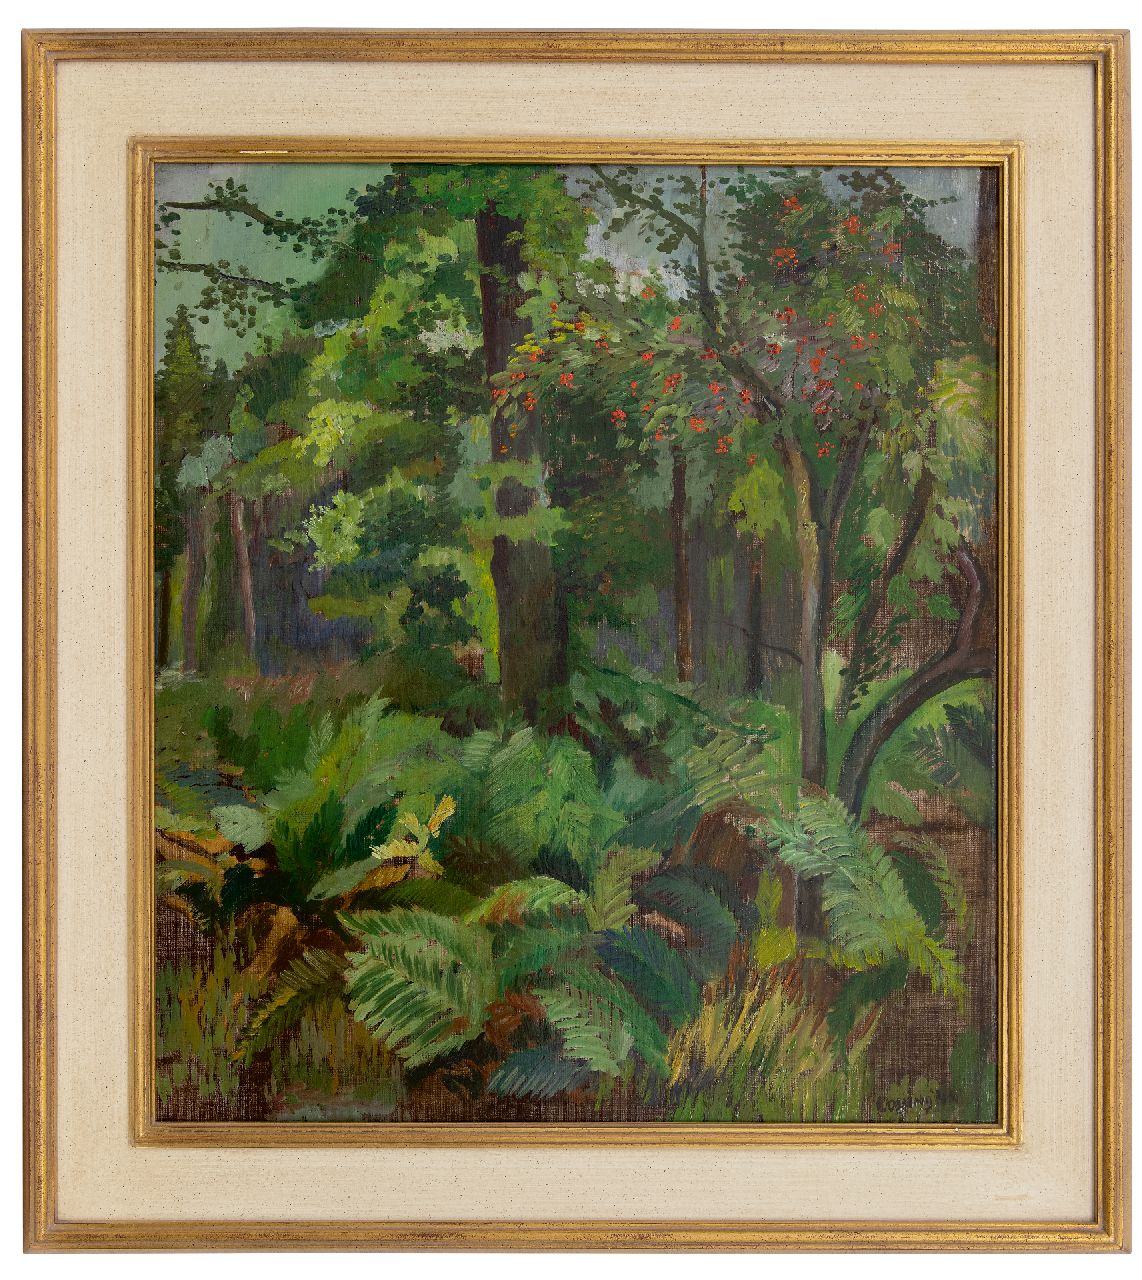 Bieruma Oosting A.J.W.  | Adriana Johanna Wilhelmina 'Jeanne' Bieruma Oosting, Forest view at the Lauswolt estate, oil on canvas 64.9 x 56.9 cm, signed l.r. and dated '44